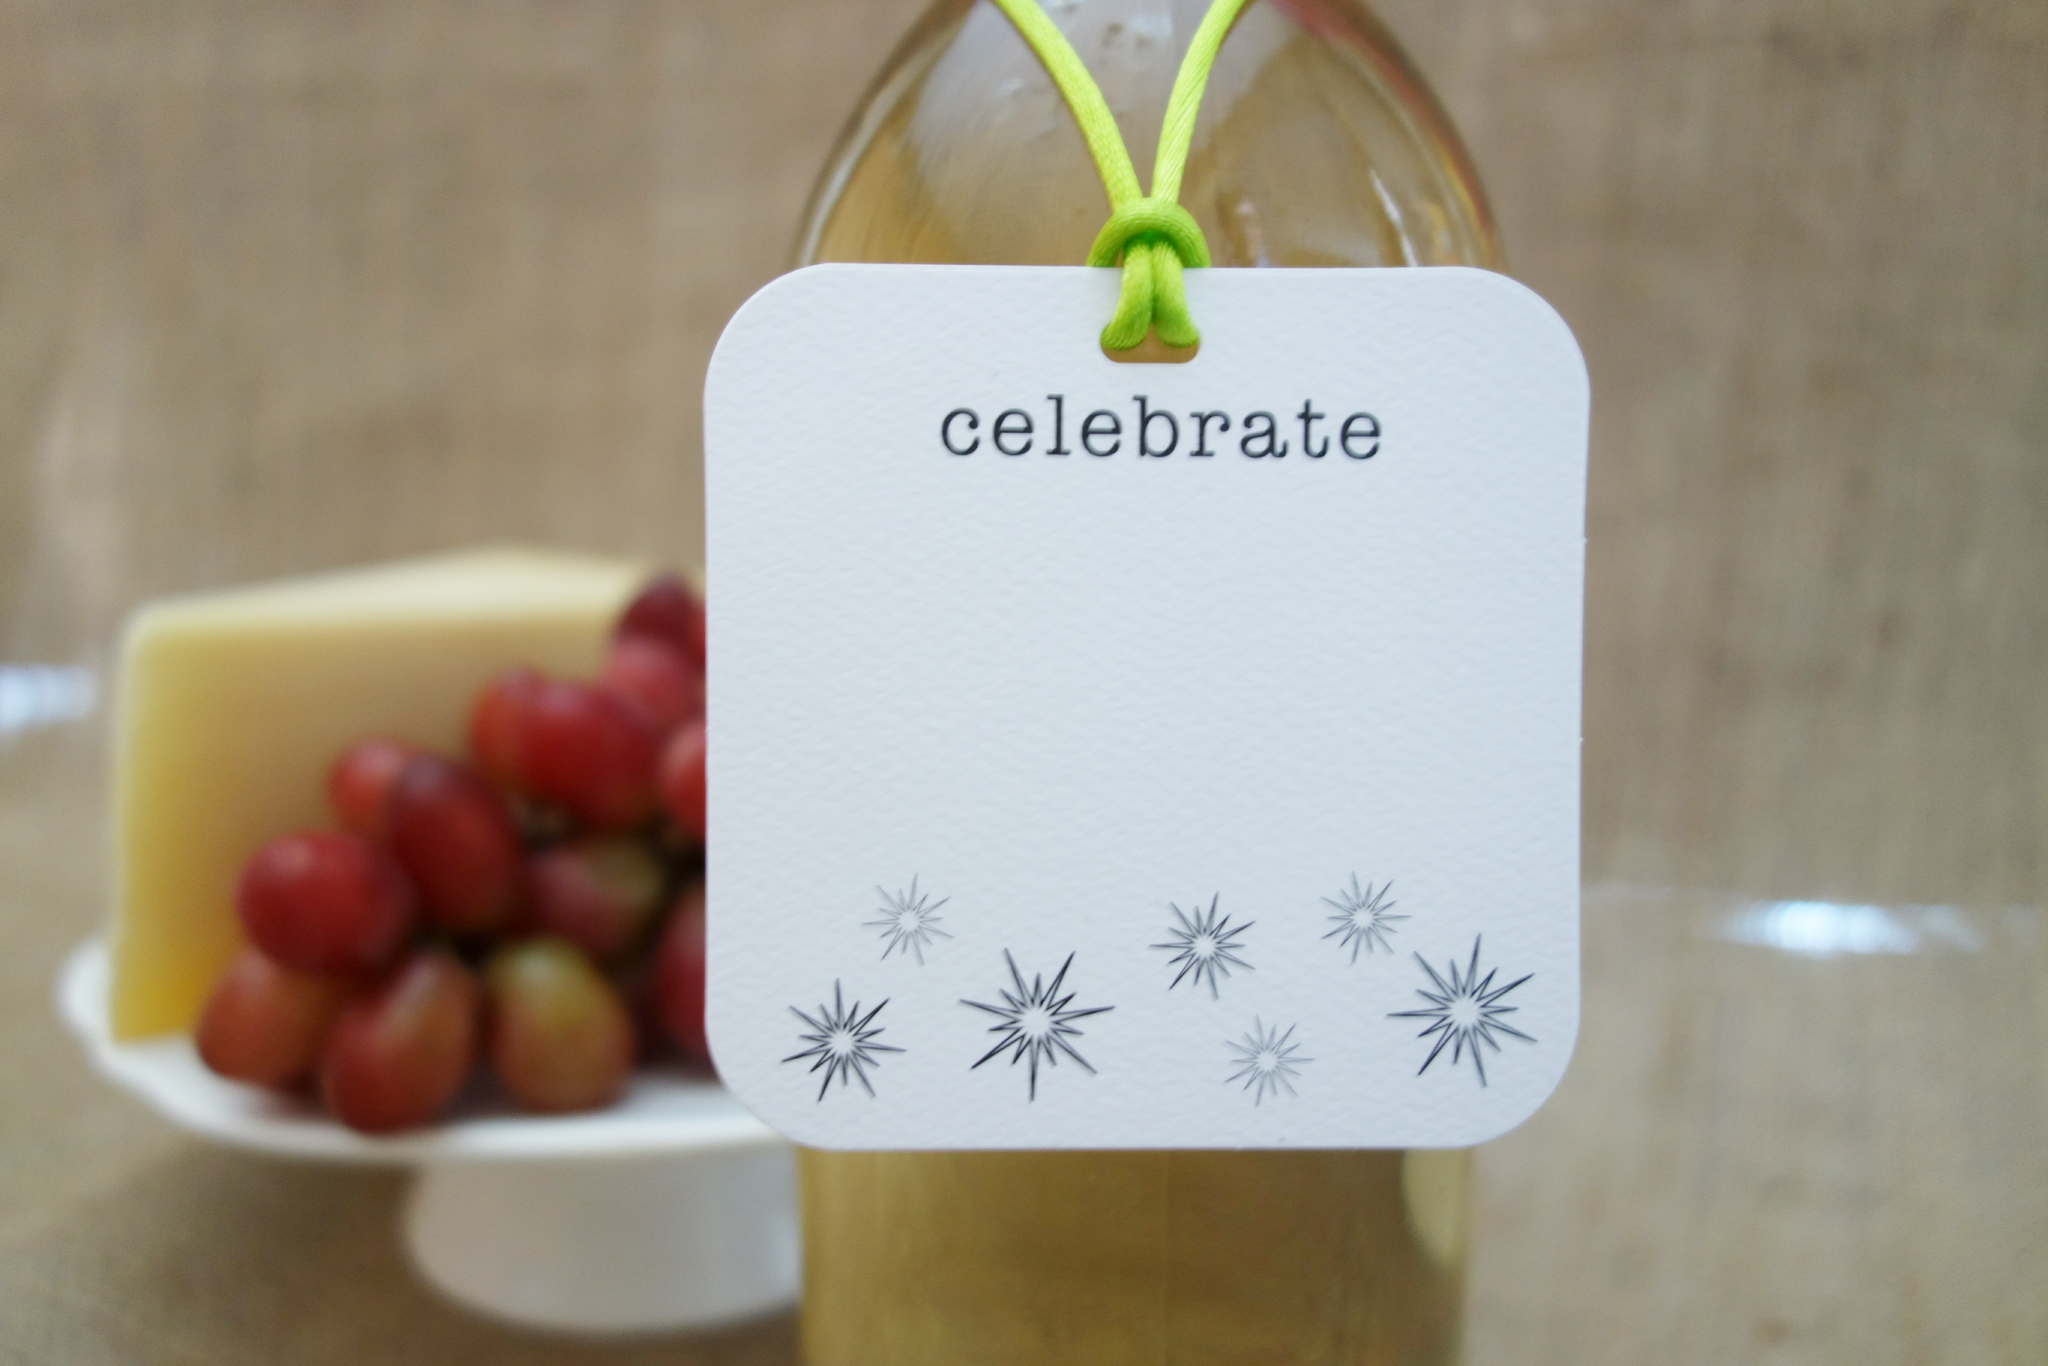 wine tags on wine bottles - the gifted tag